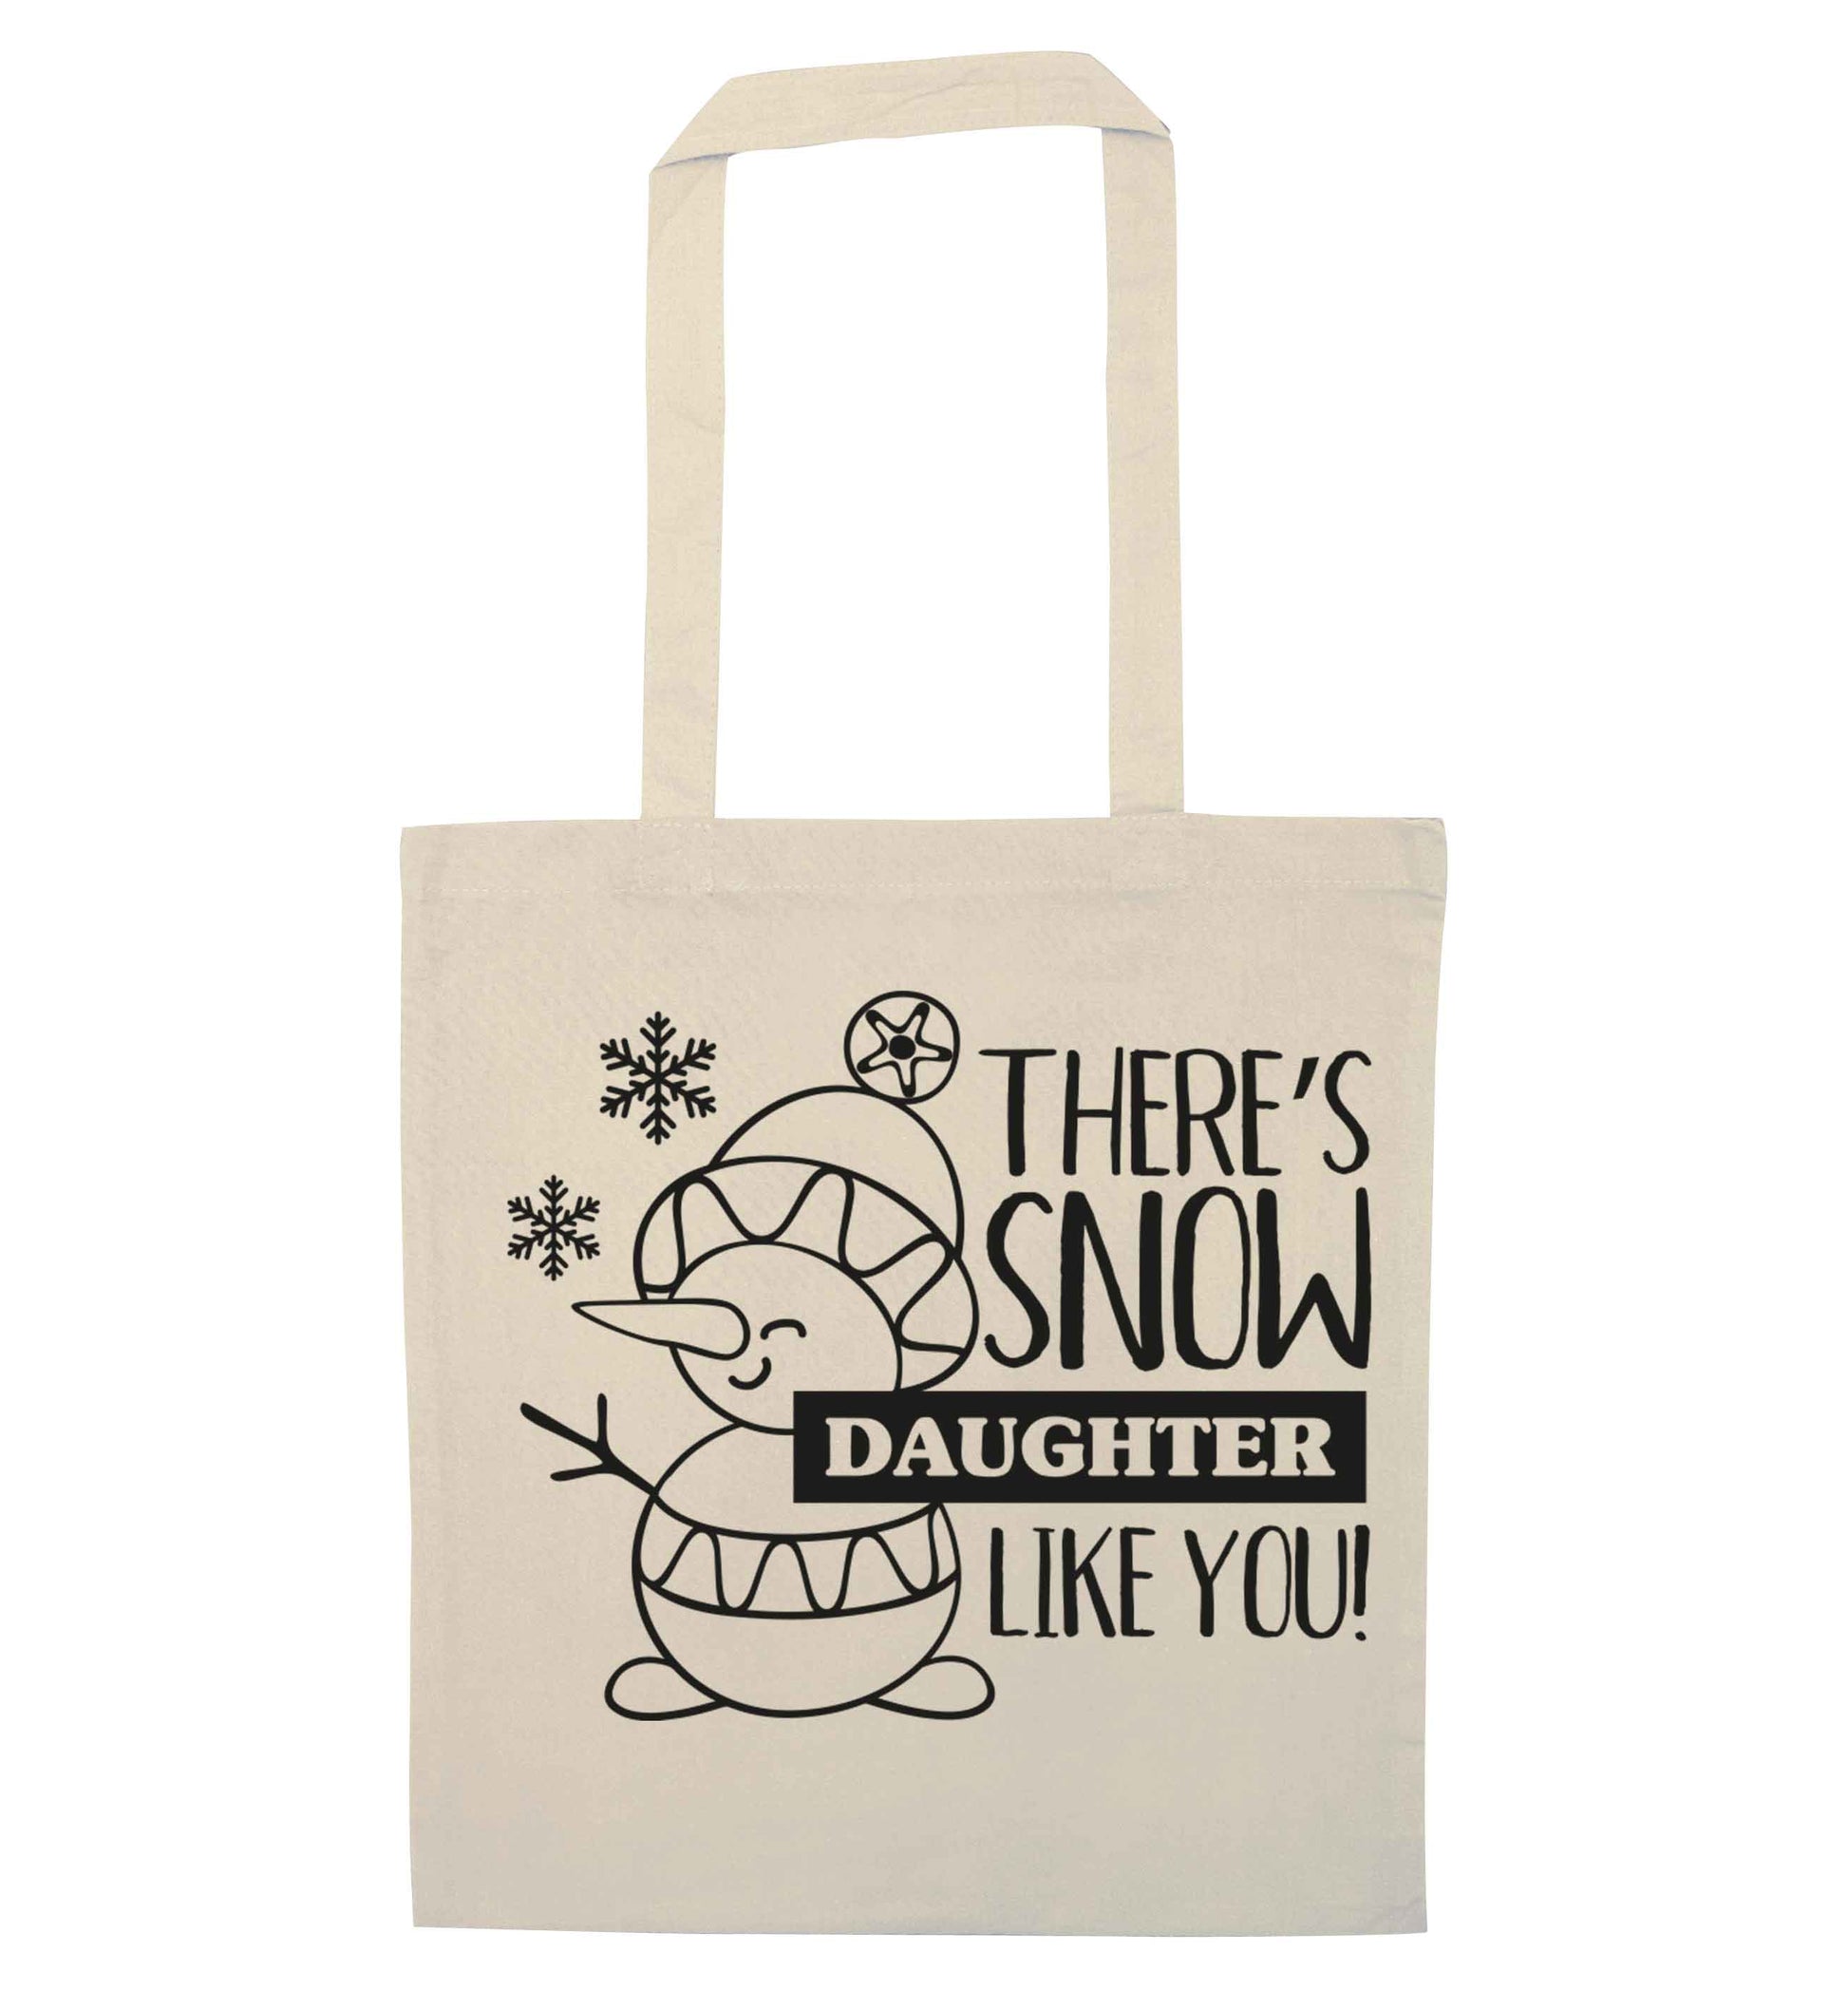 There's snow daughter like you natural tote bag